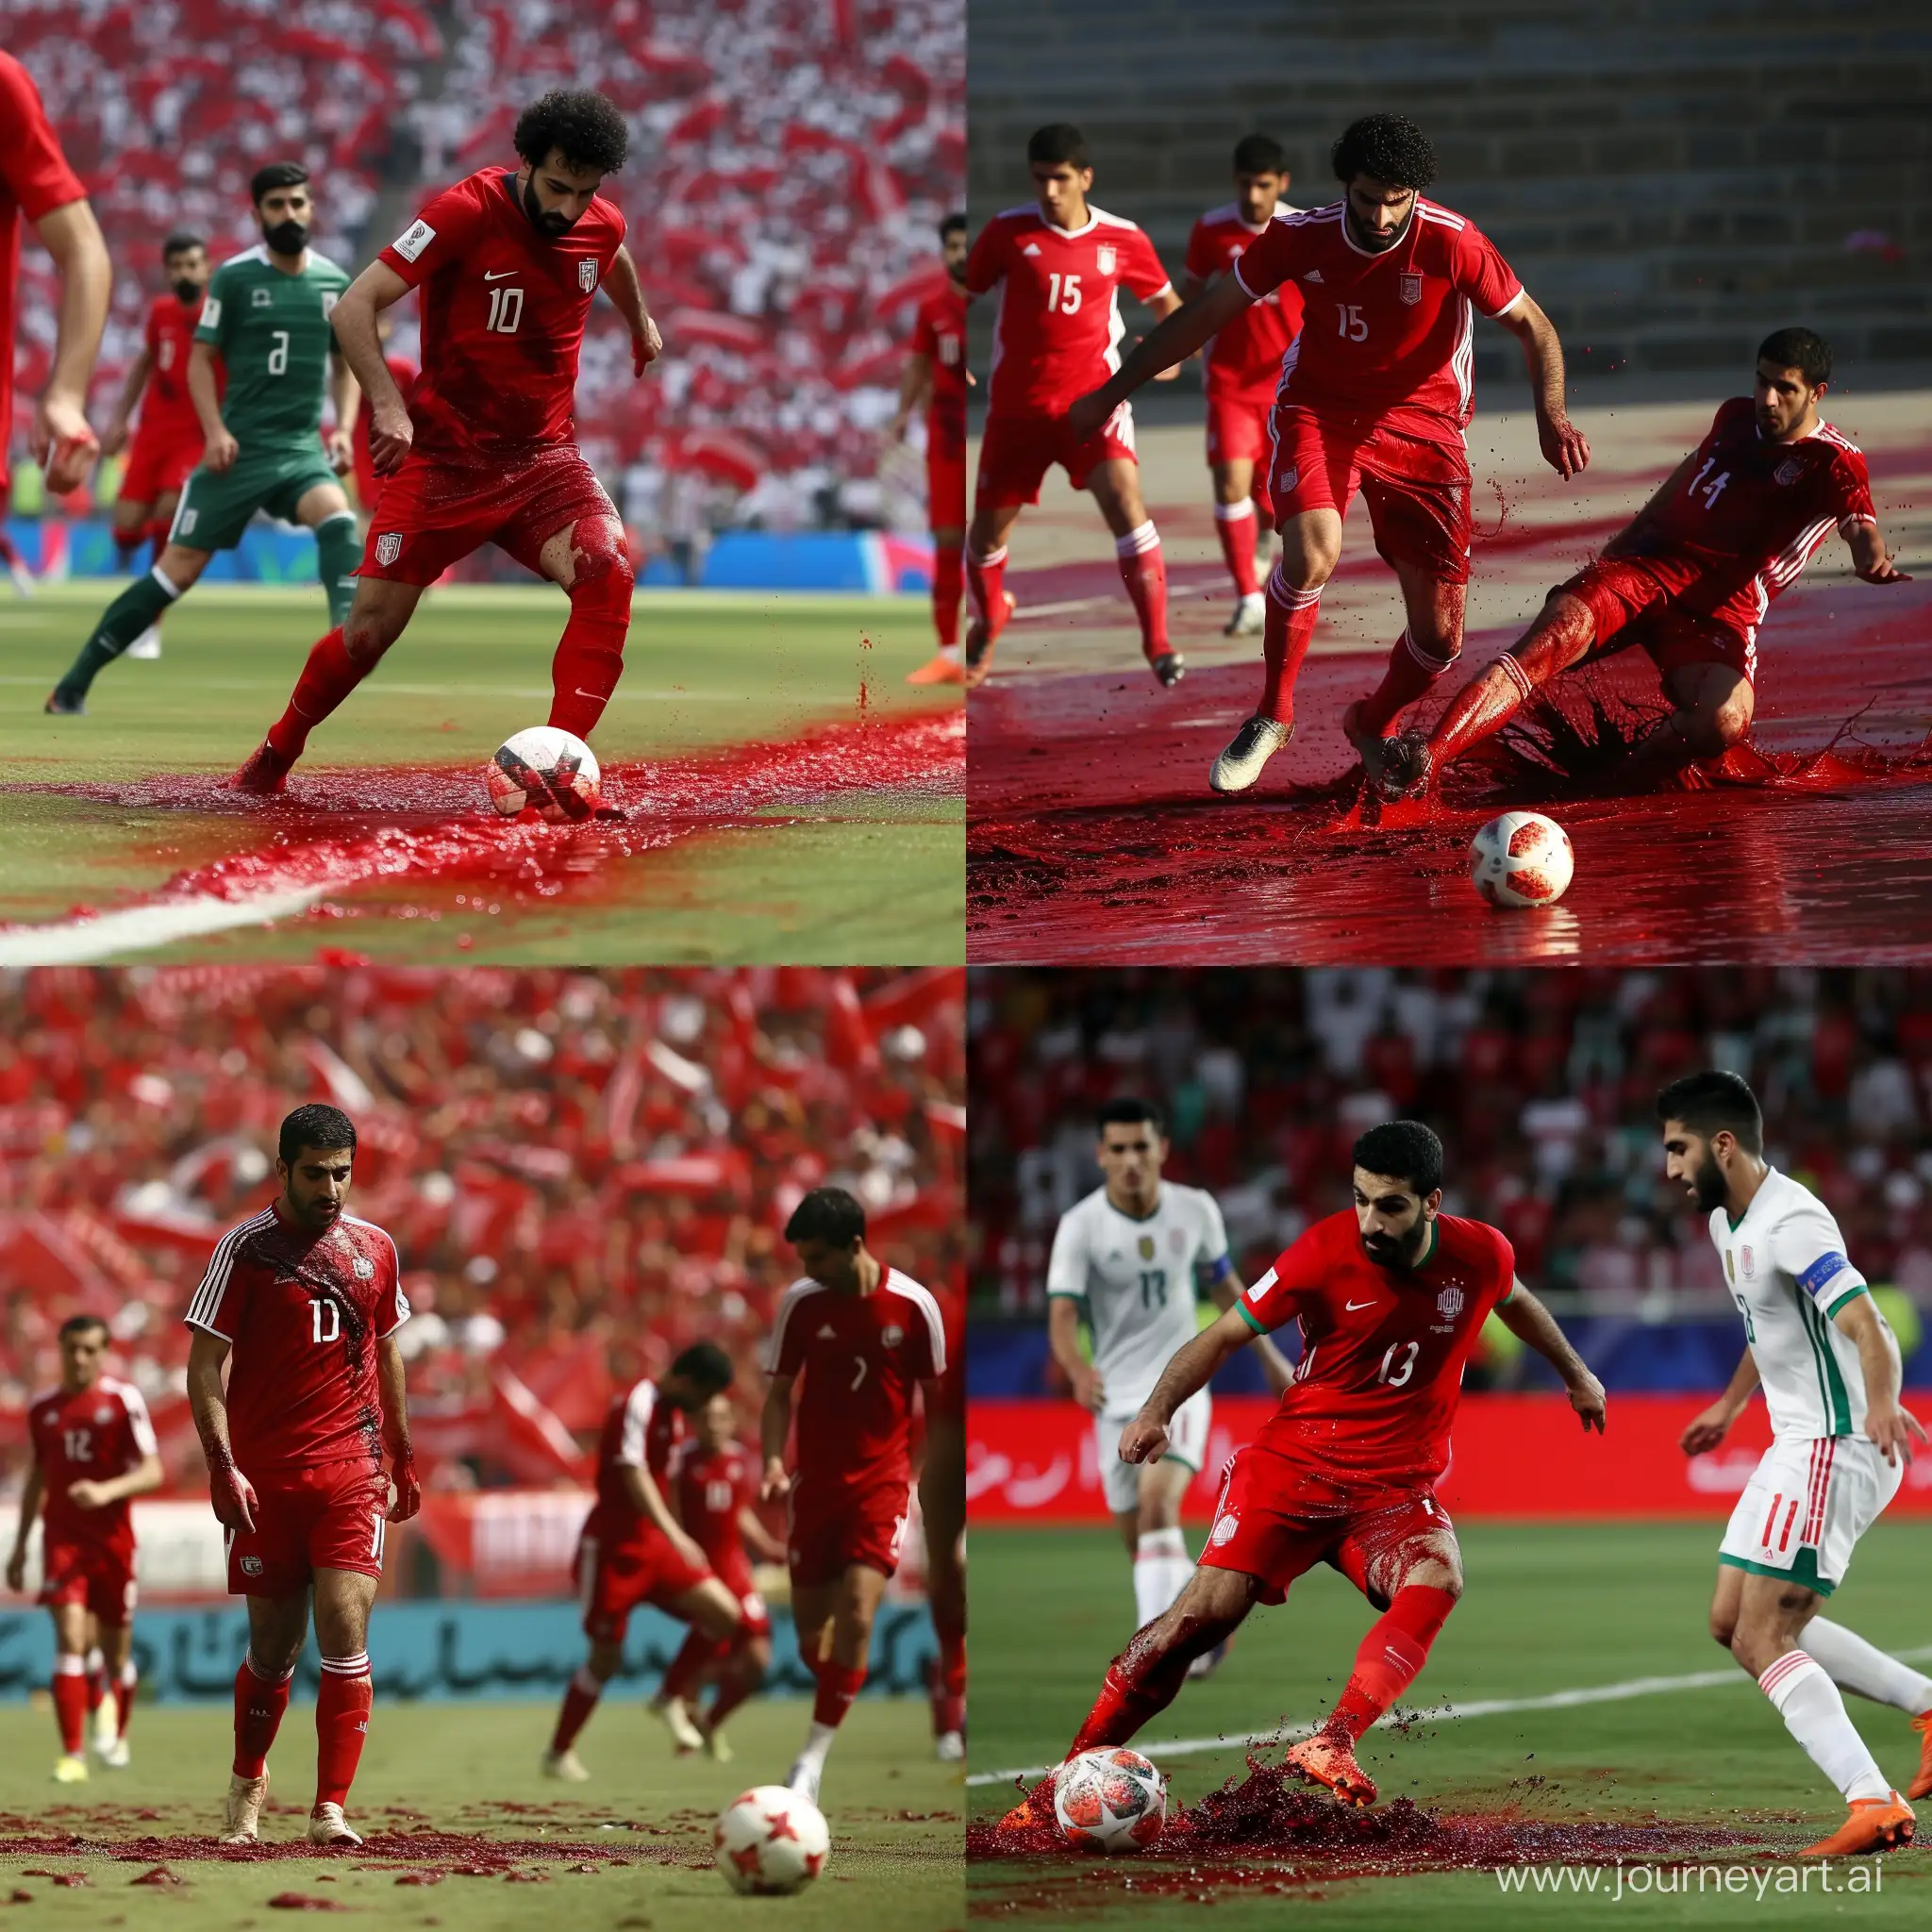  iranian national soccer team playing in blood field